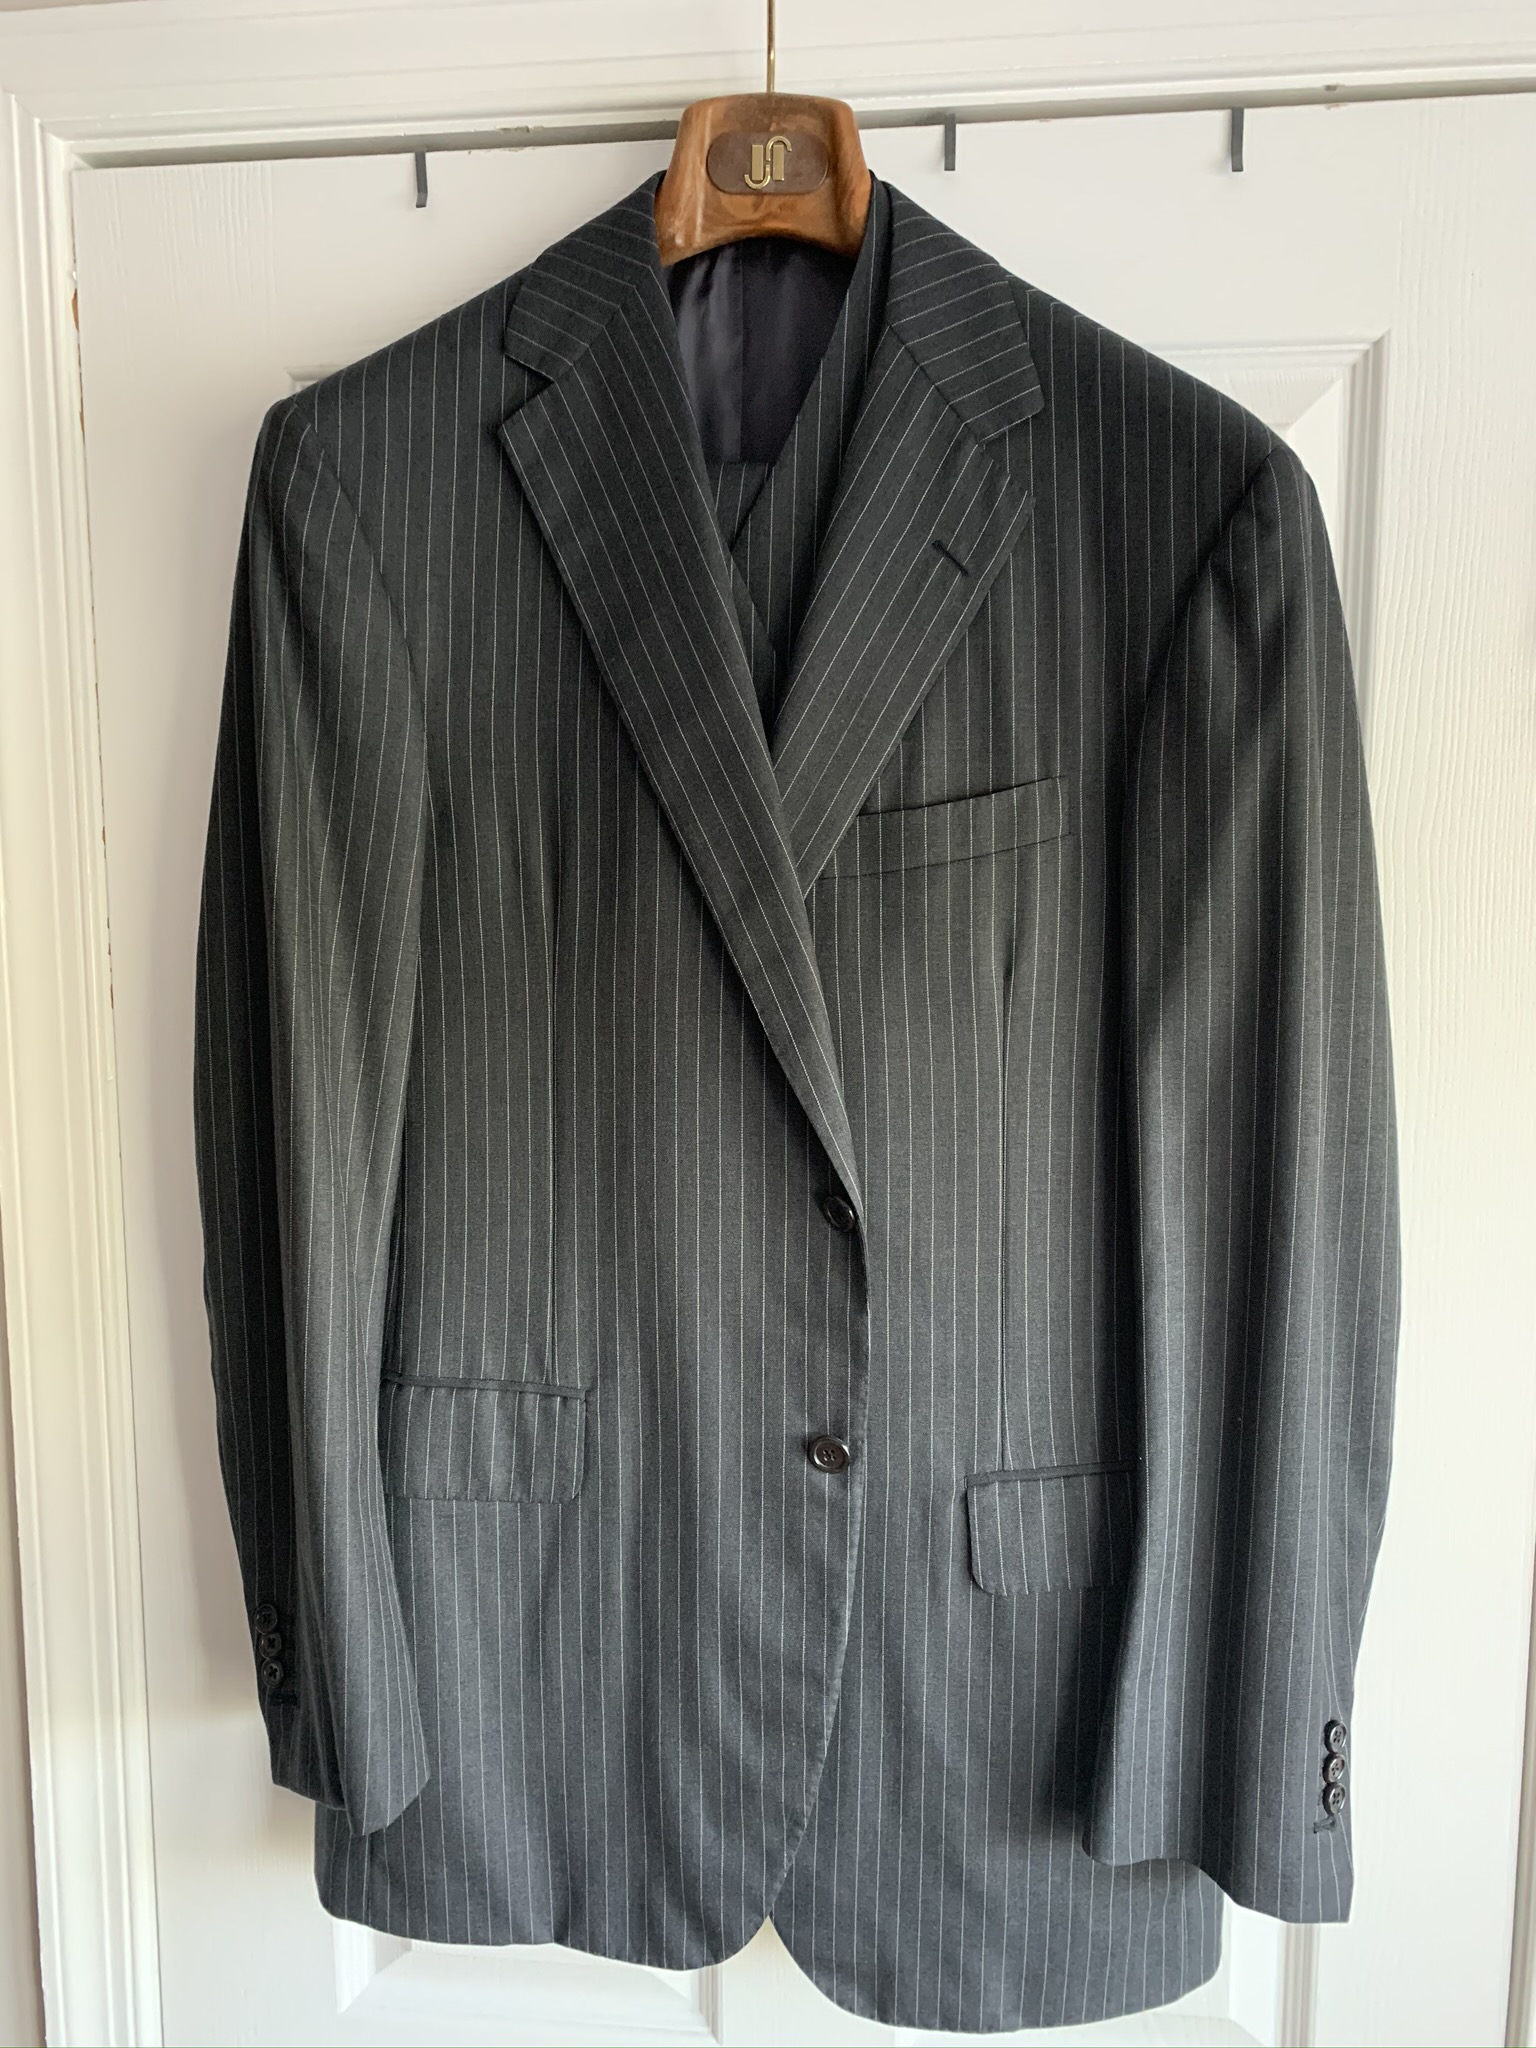 Oxxford of Chicago pinstriped wool suit 44 long | The Fedora Lounge